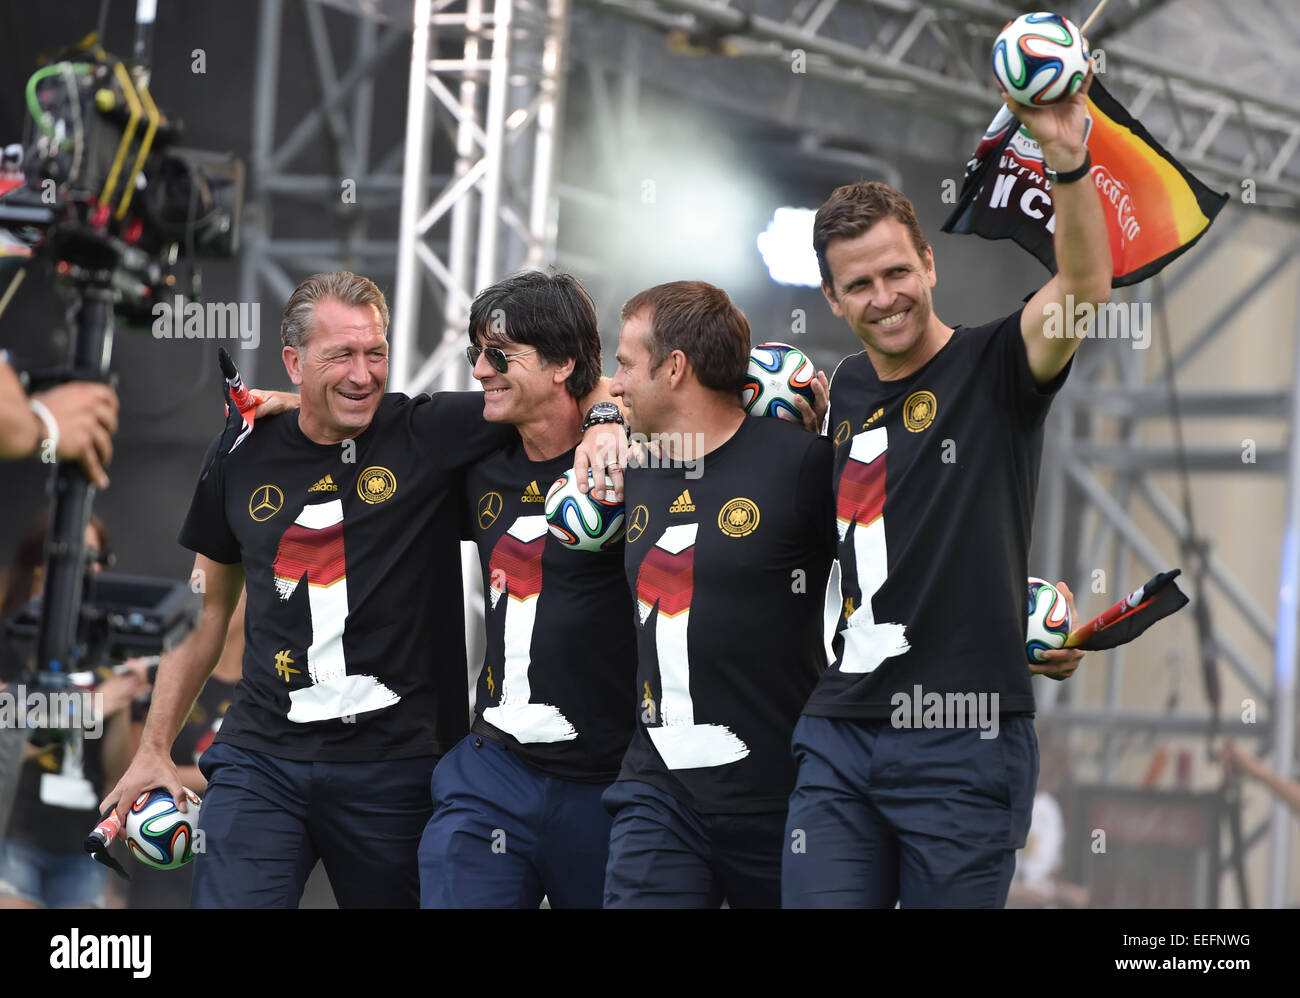 The Germany national football team celebrating their victory at Brandenburg Gate (Brandenburger Tor). 400,000 fans gathered at the so called Fanmeile to greet the winners of the 2014 World Cup.  Featuring: Andreas Köpke,Joachim Löw,Hansi Flick,Oliver Bier Stock Photo